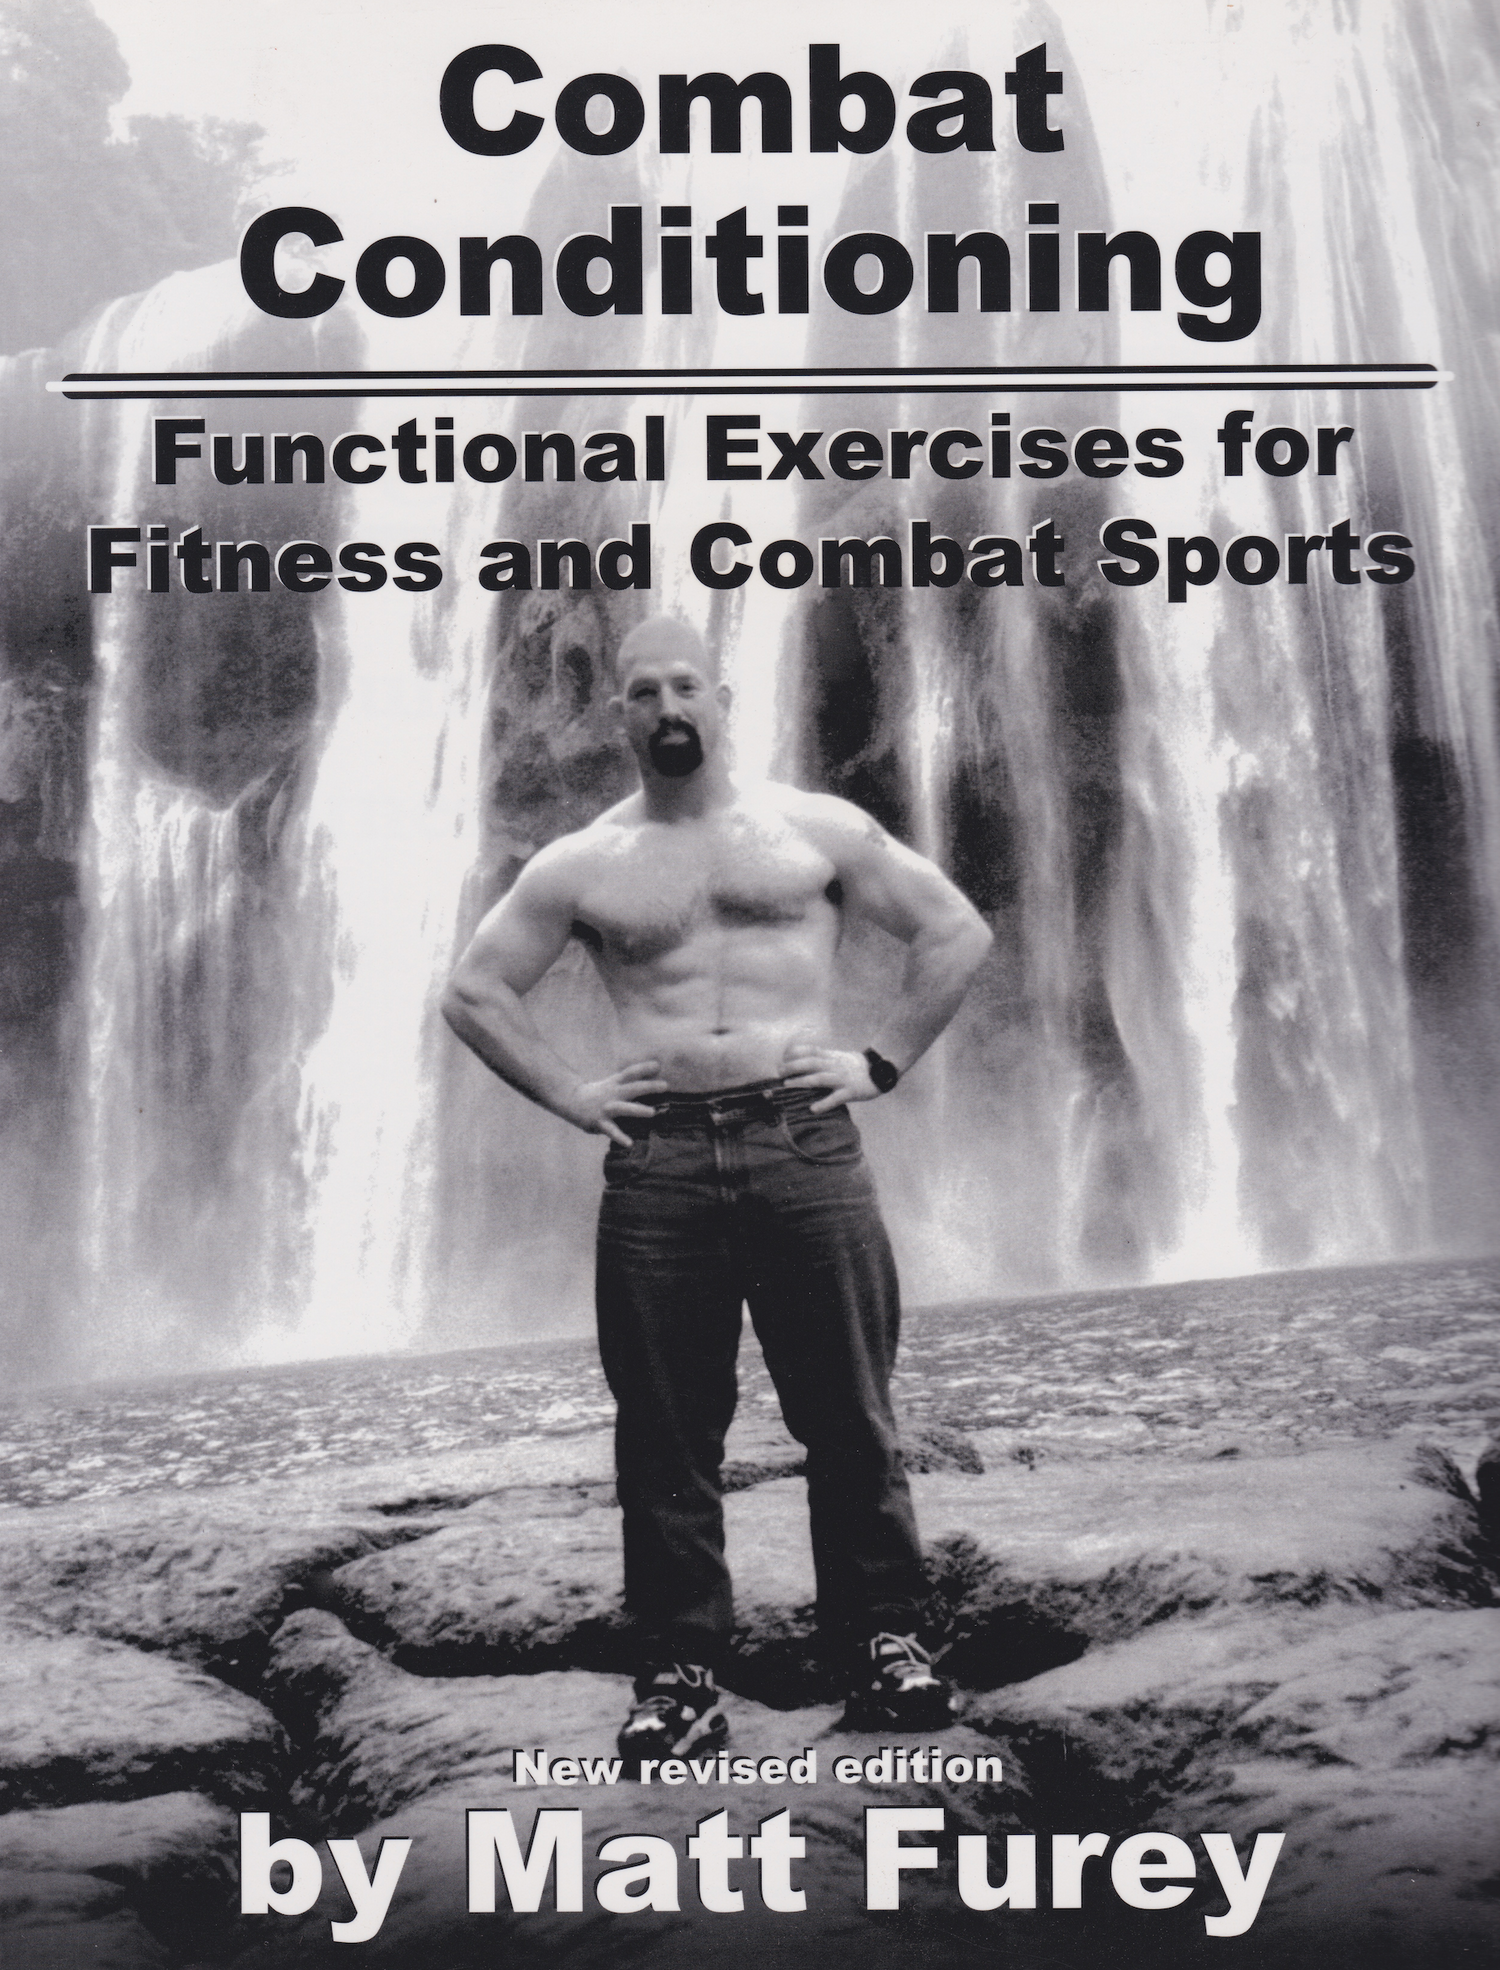 Combat Conditioning: Functional Exercises For Fitness And Combat Sports Book by Matt Furey (Revised Edition) (Preowned)